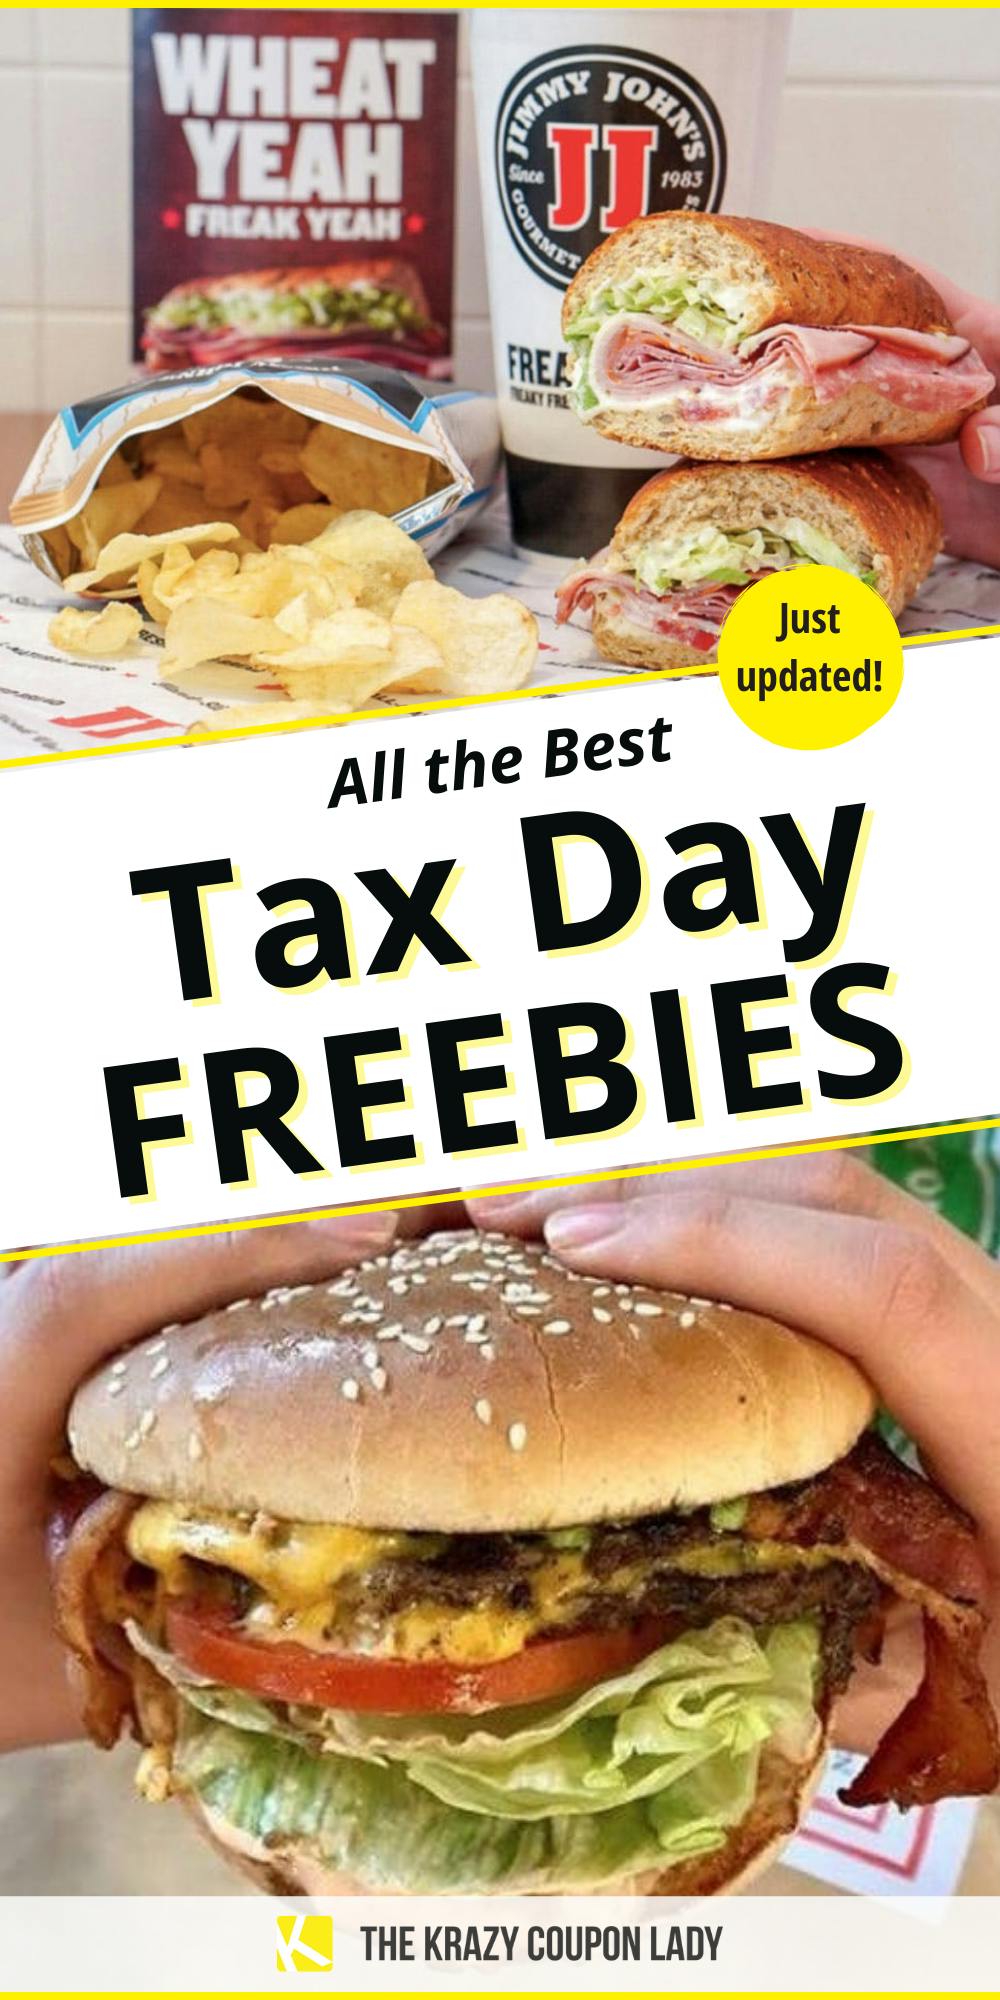 12 Deals on Tax Day That'll Get You Free Food & Discounts